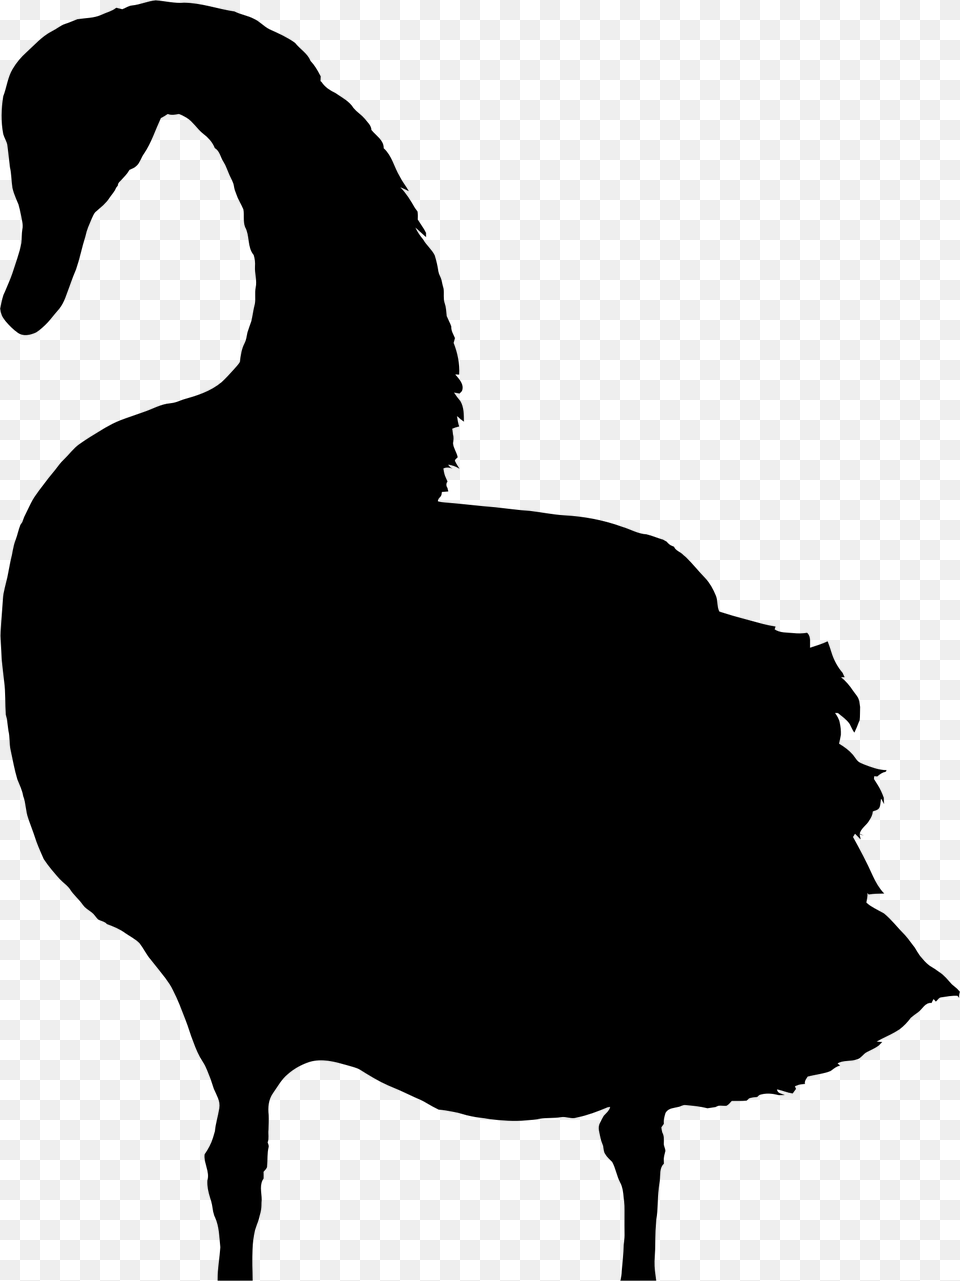 Swan Silhouette At Getdrawings Silhouette Swan Clipart Transparent, Gray Png